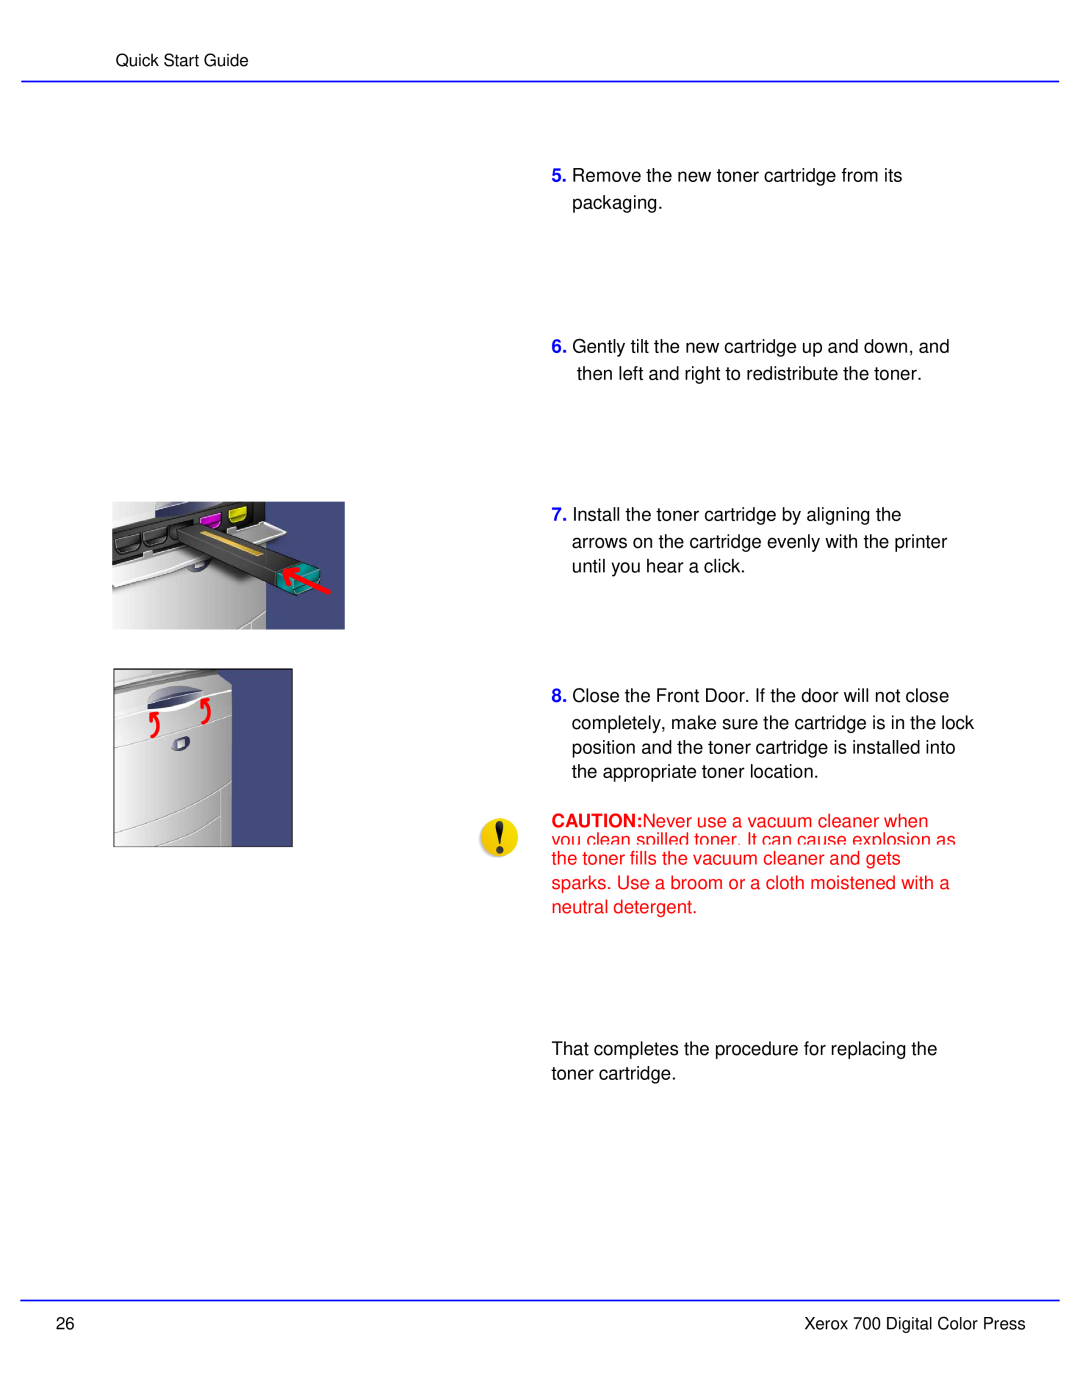 Xerox 700 quick start Remove the new toner cartridge from its packaging 